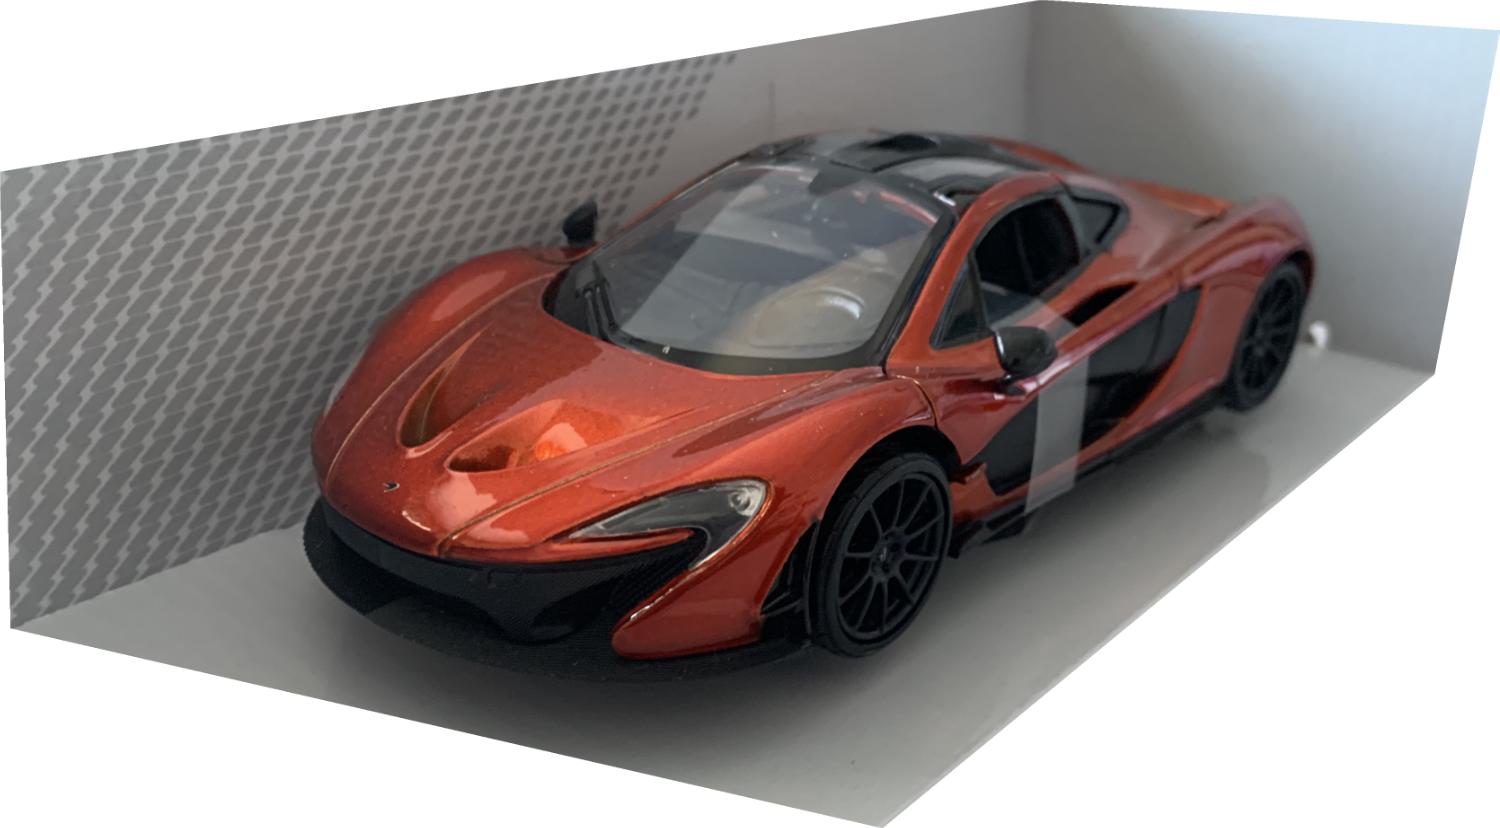 The McLaren P1 model is mounted on a removable plinth and presented in a window display box , the car is approx 18cm long